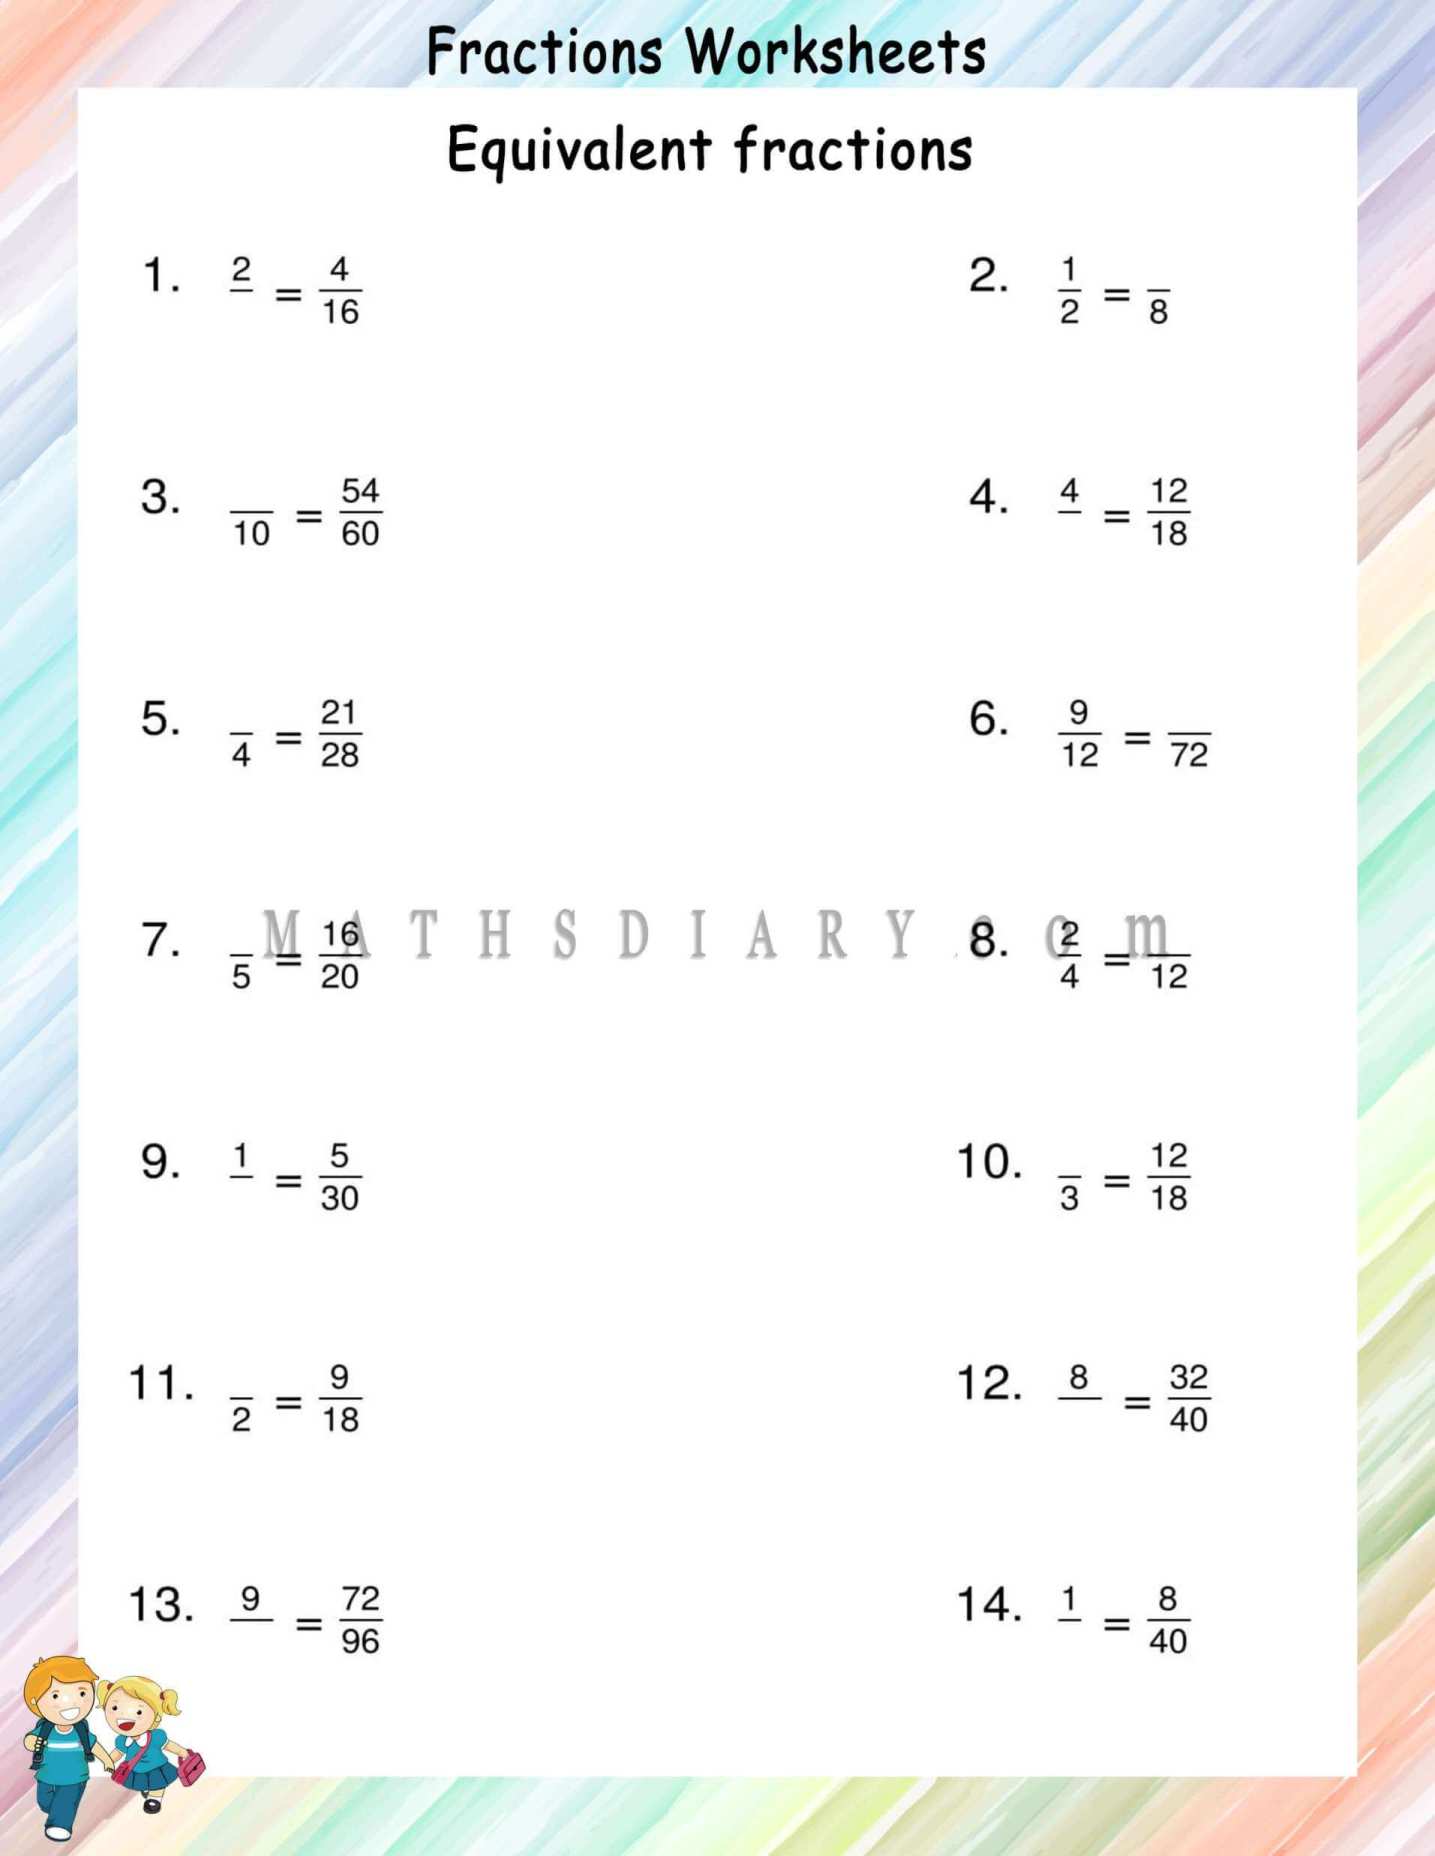 Find the equivalent fractions worksheets - Math Worksheets - MathsDiary.com